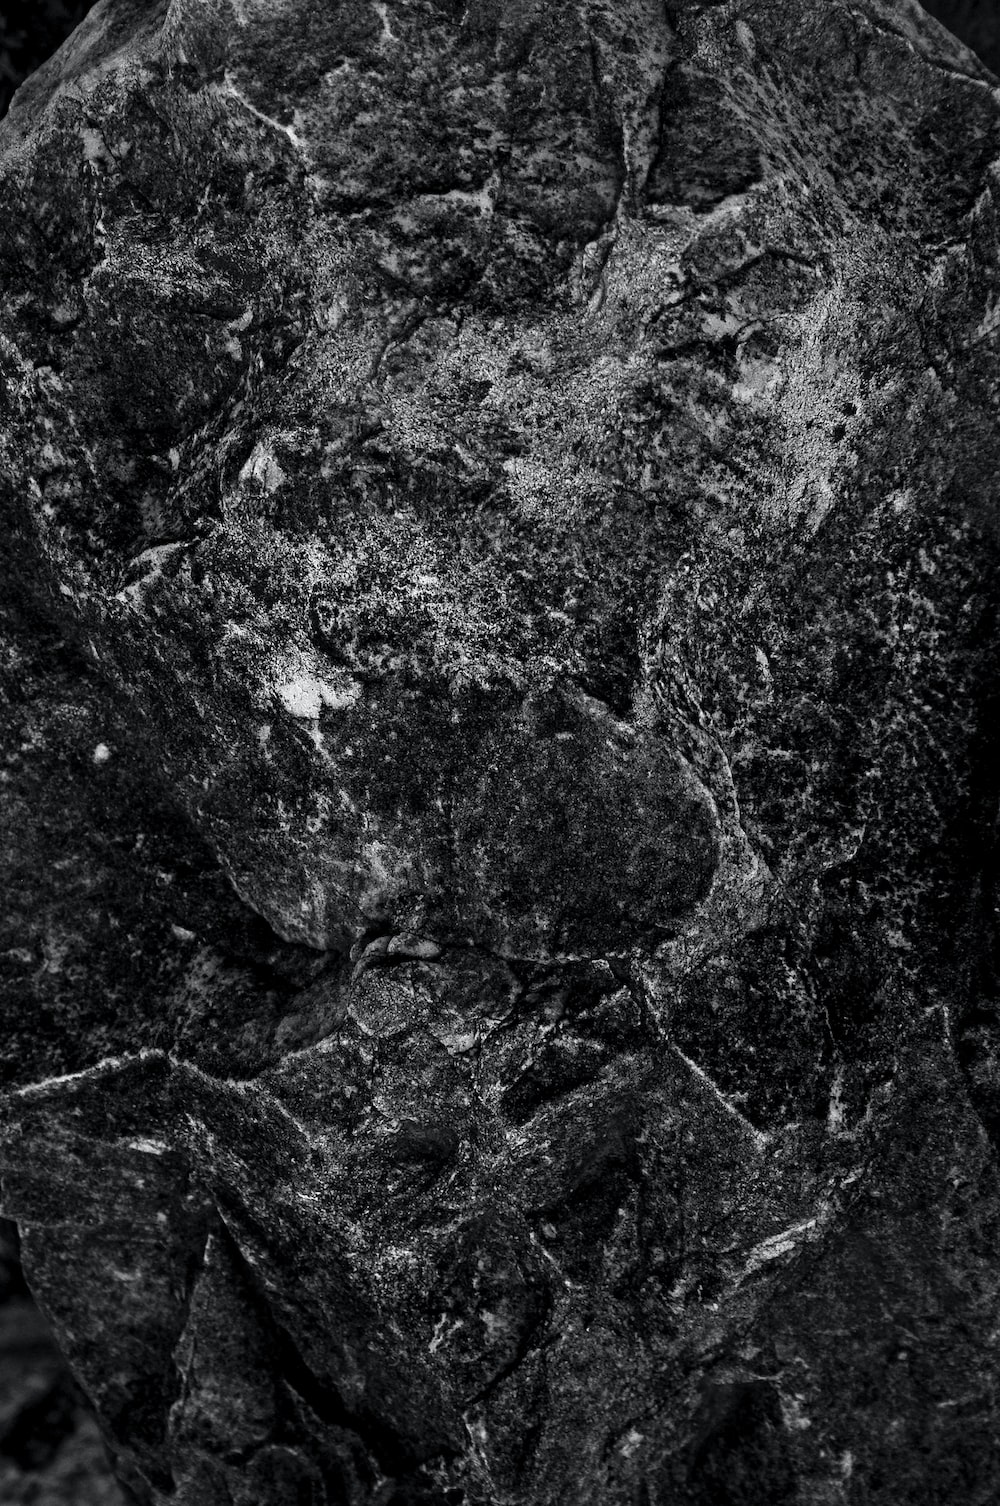 1K+ Black And White Texture Picture. Download Free Image